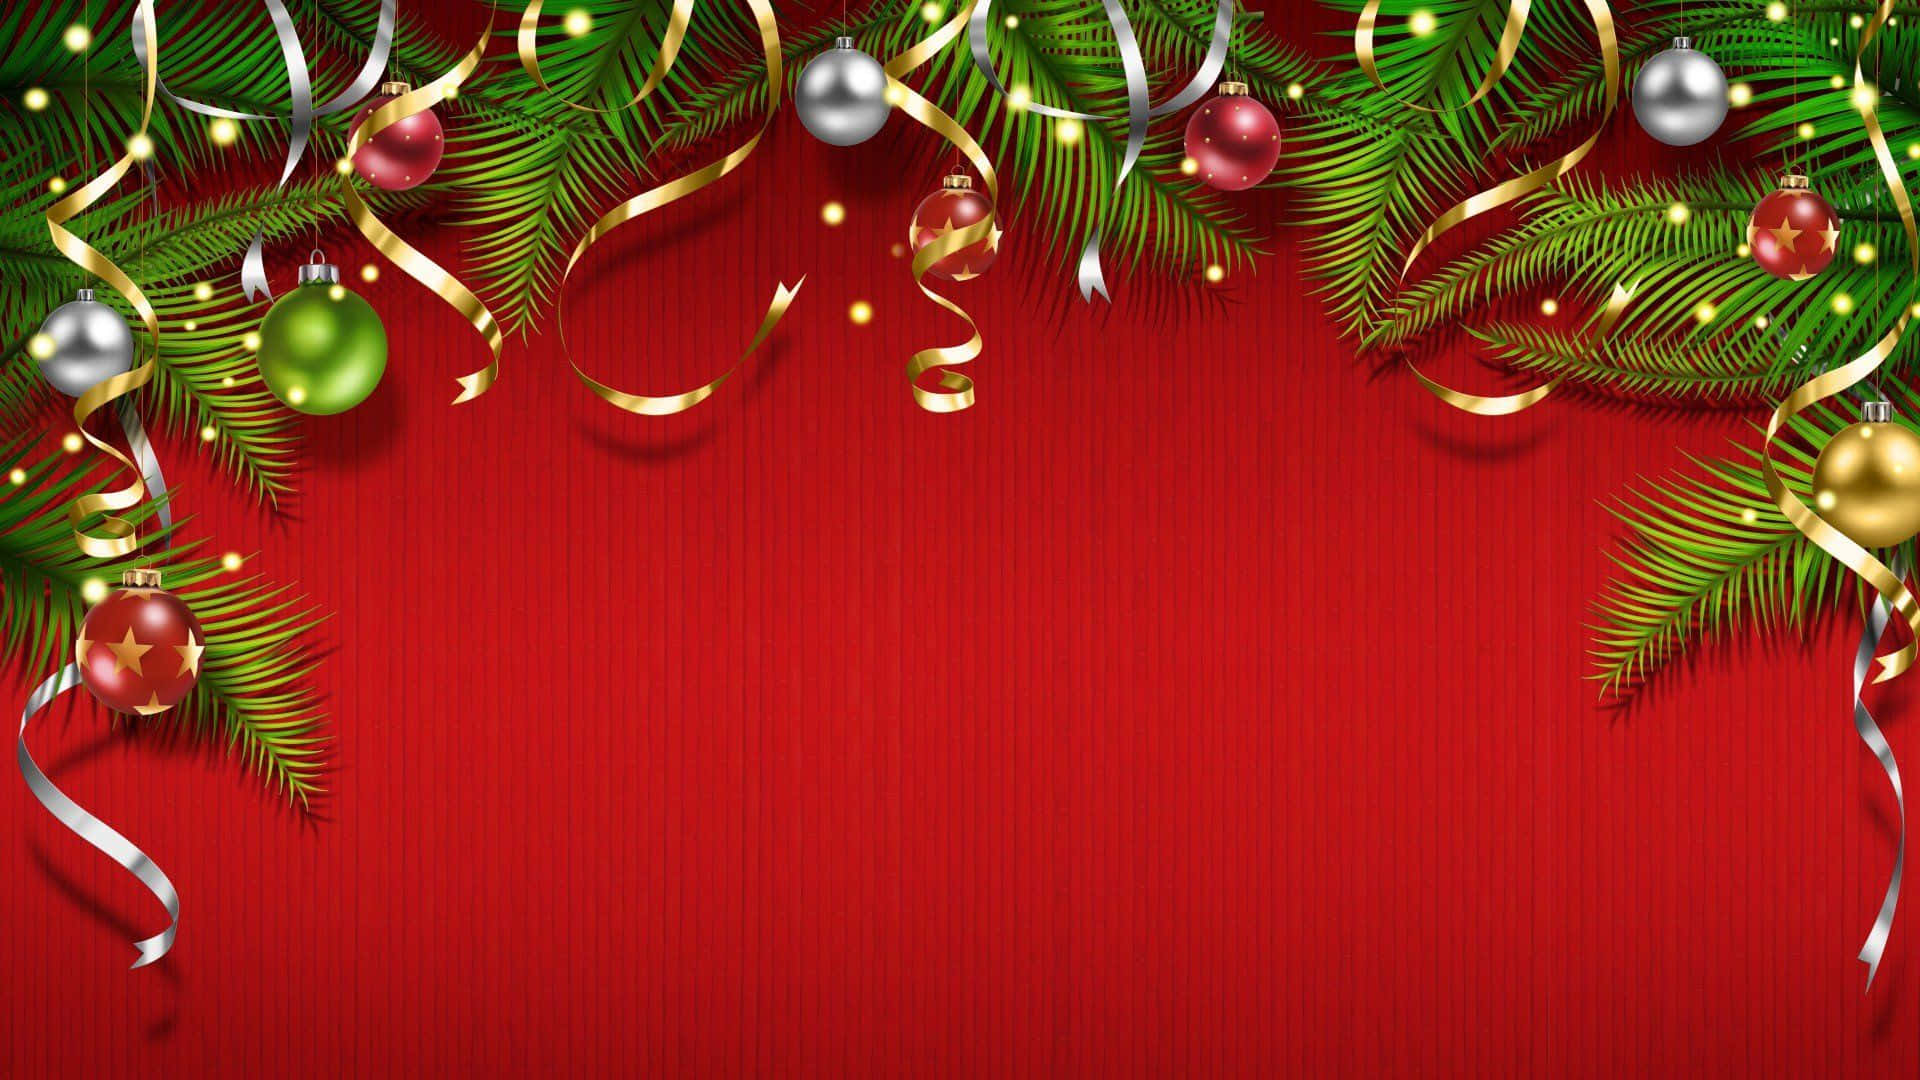 A festive Christmas background of a deep red color